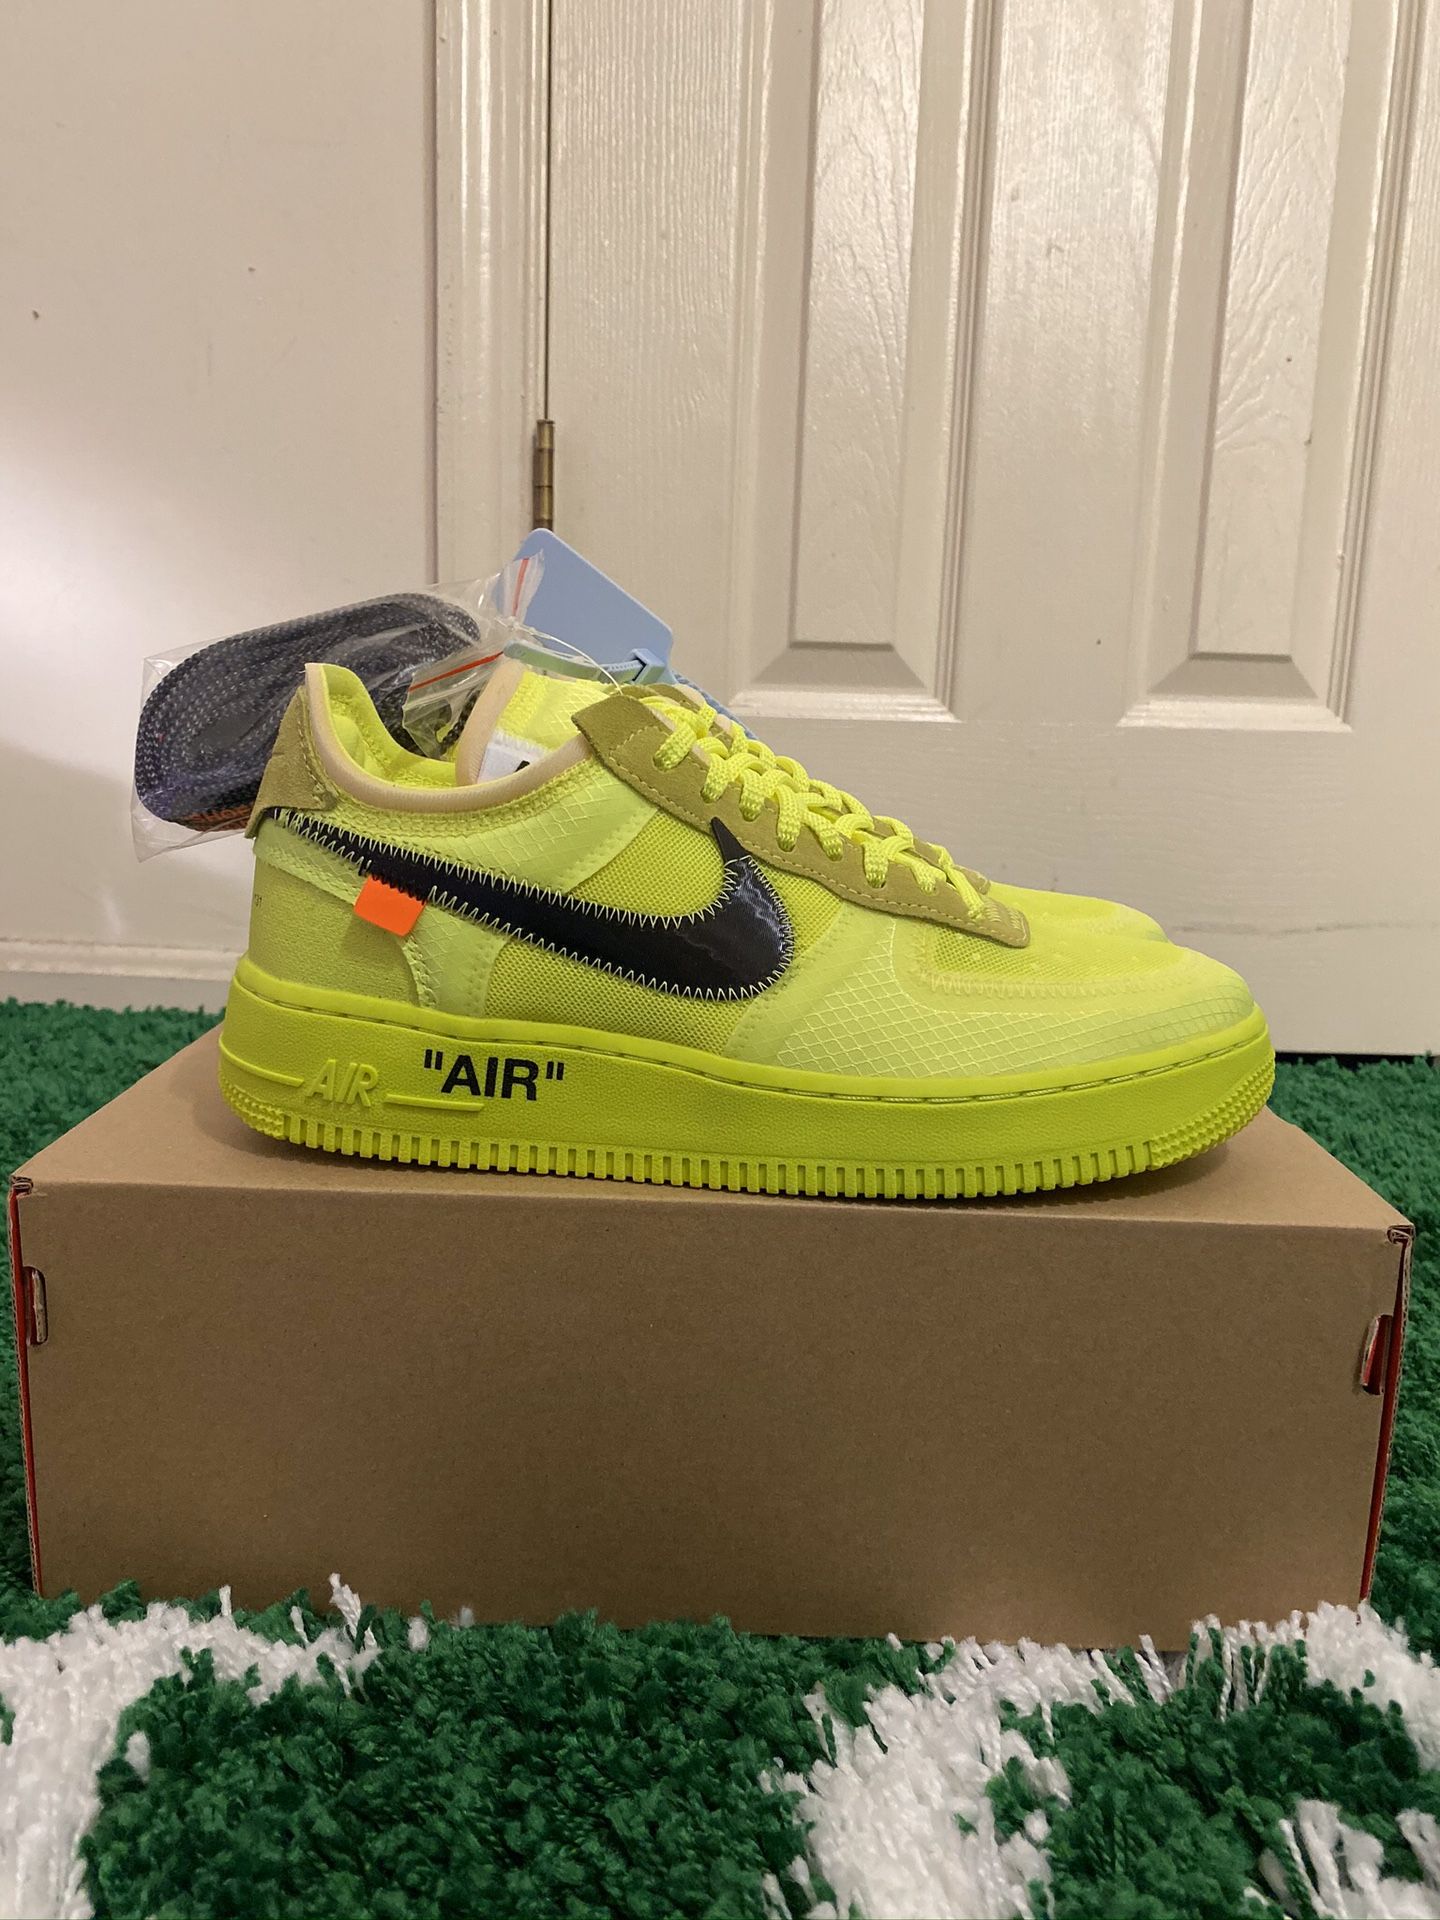 NEW NIKE AIR FORCE ONE LOW OFF WHITE VOLT LIMITED SIZES 5.5 7.5 8 9